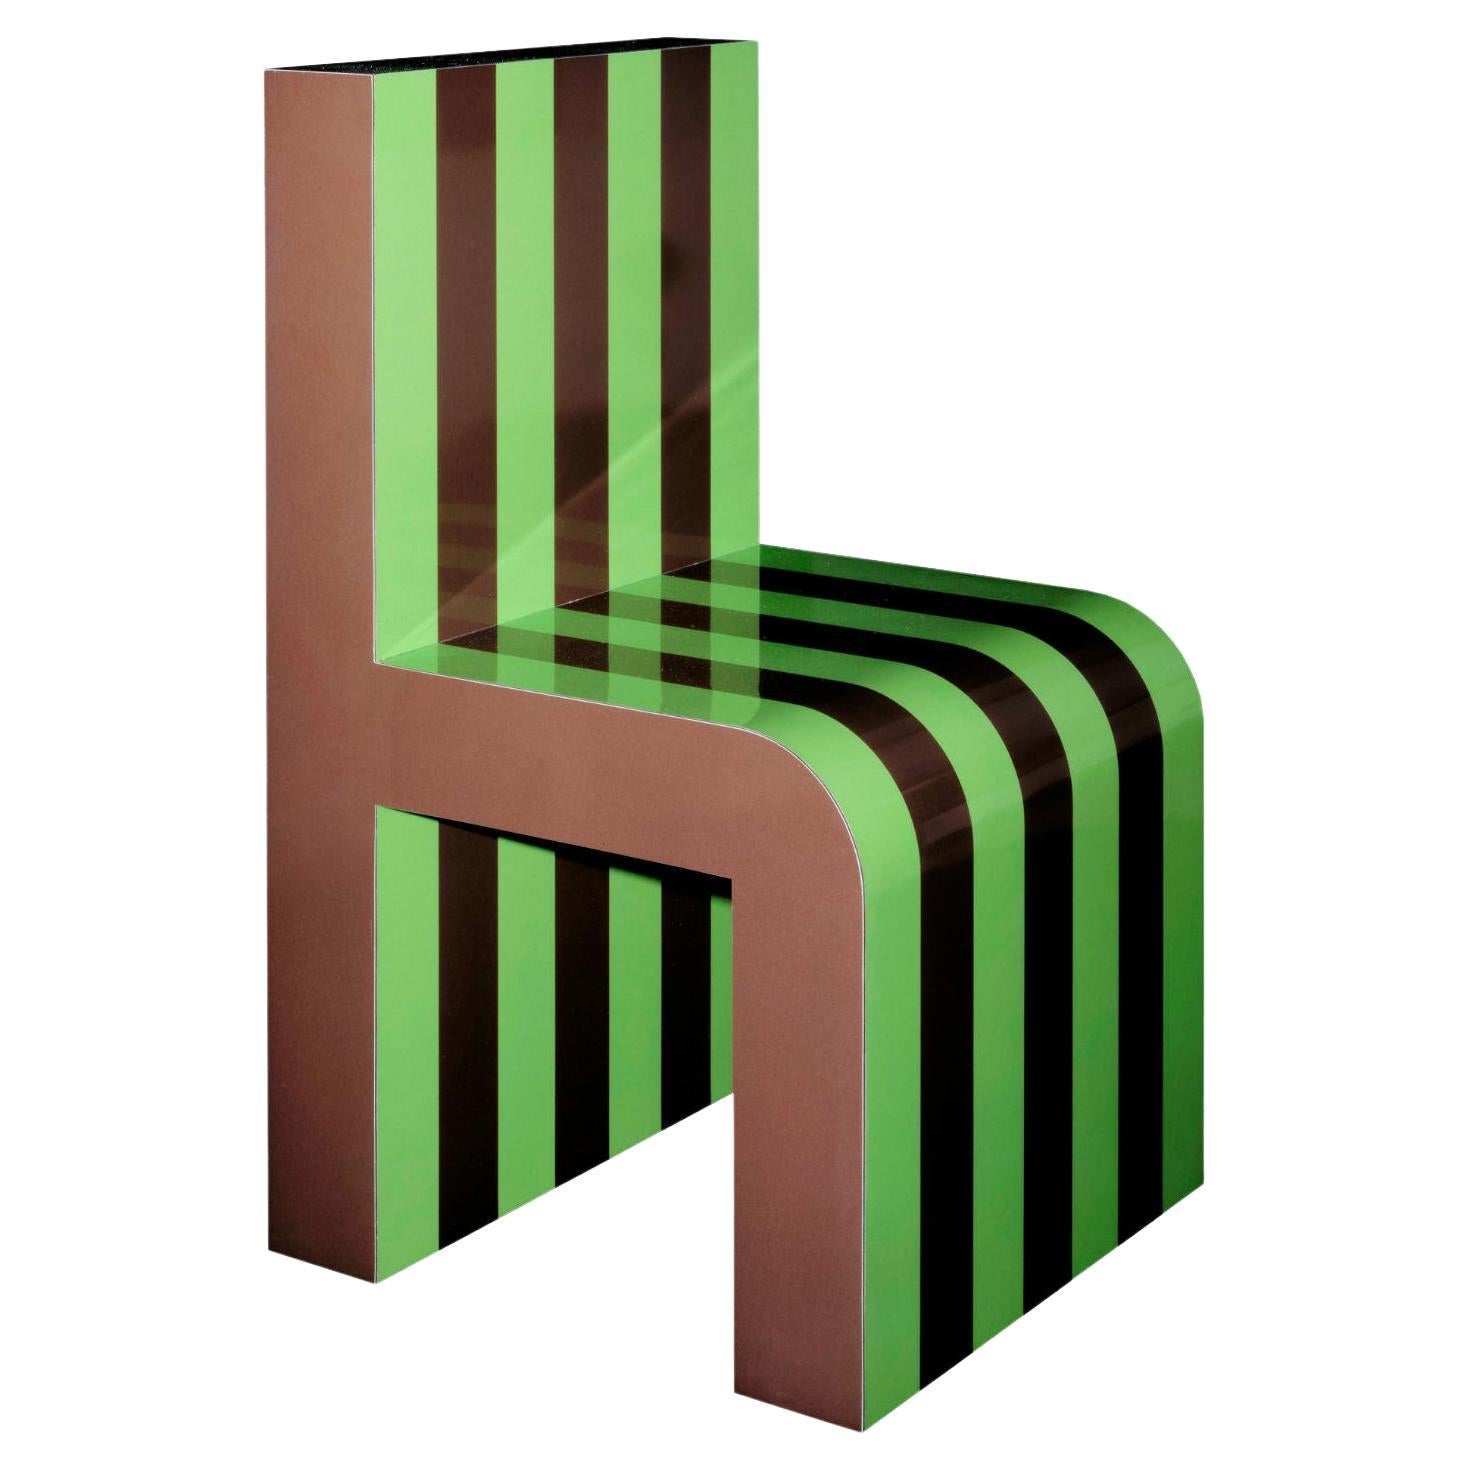 Arthur Arbesser Pemo Chair No. 3 - Chocolate/Pea For Sale